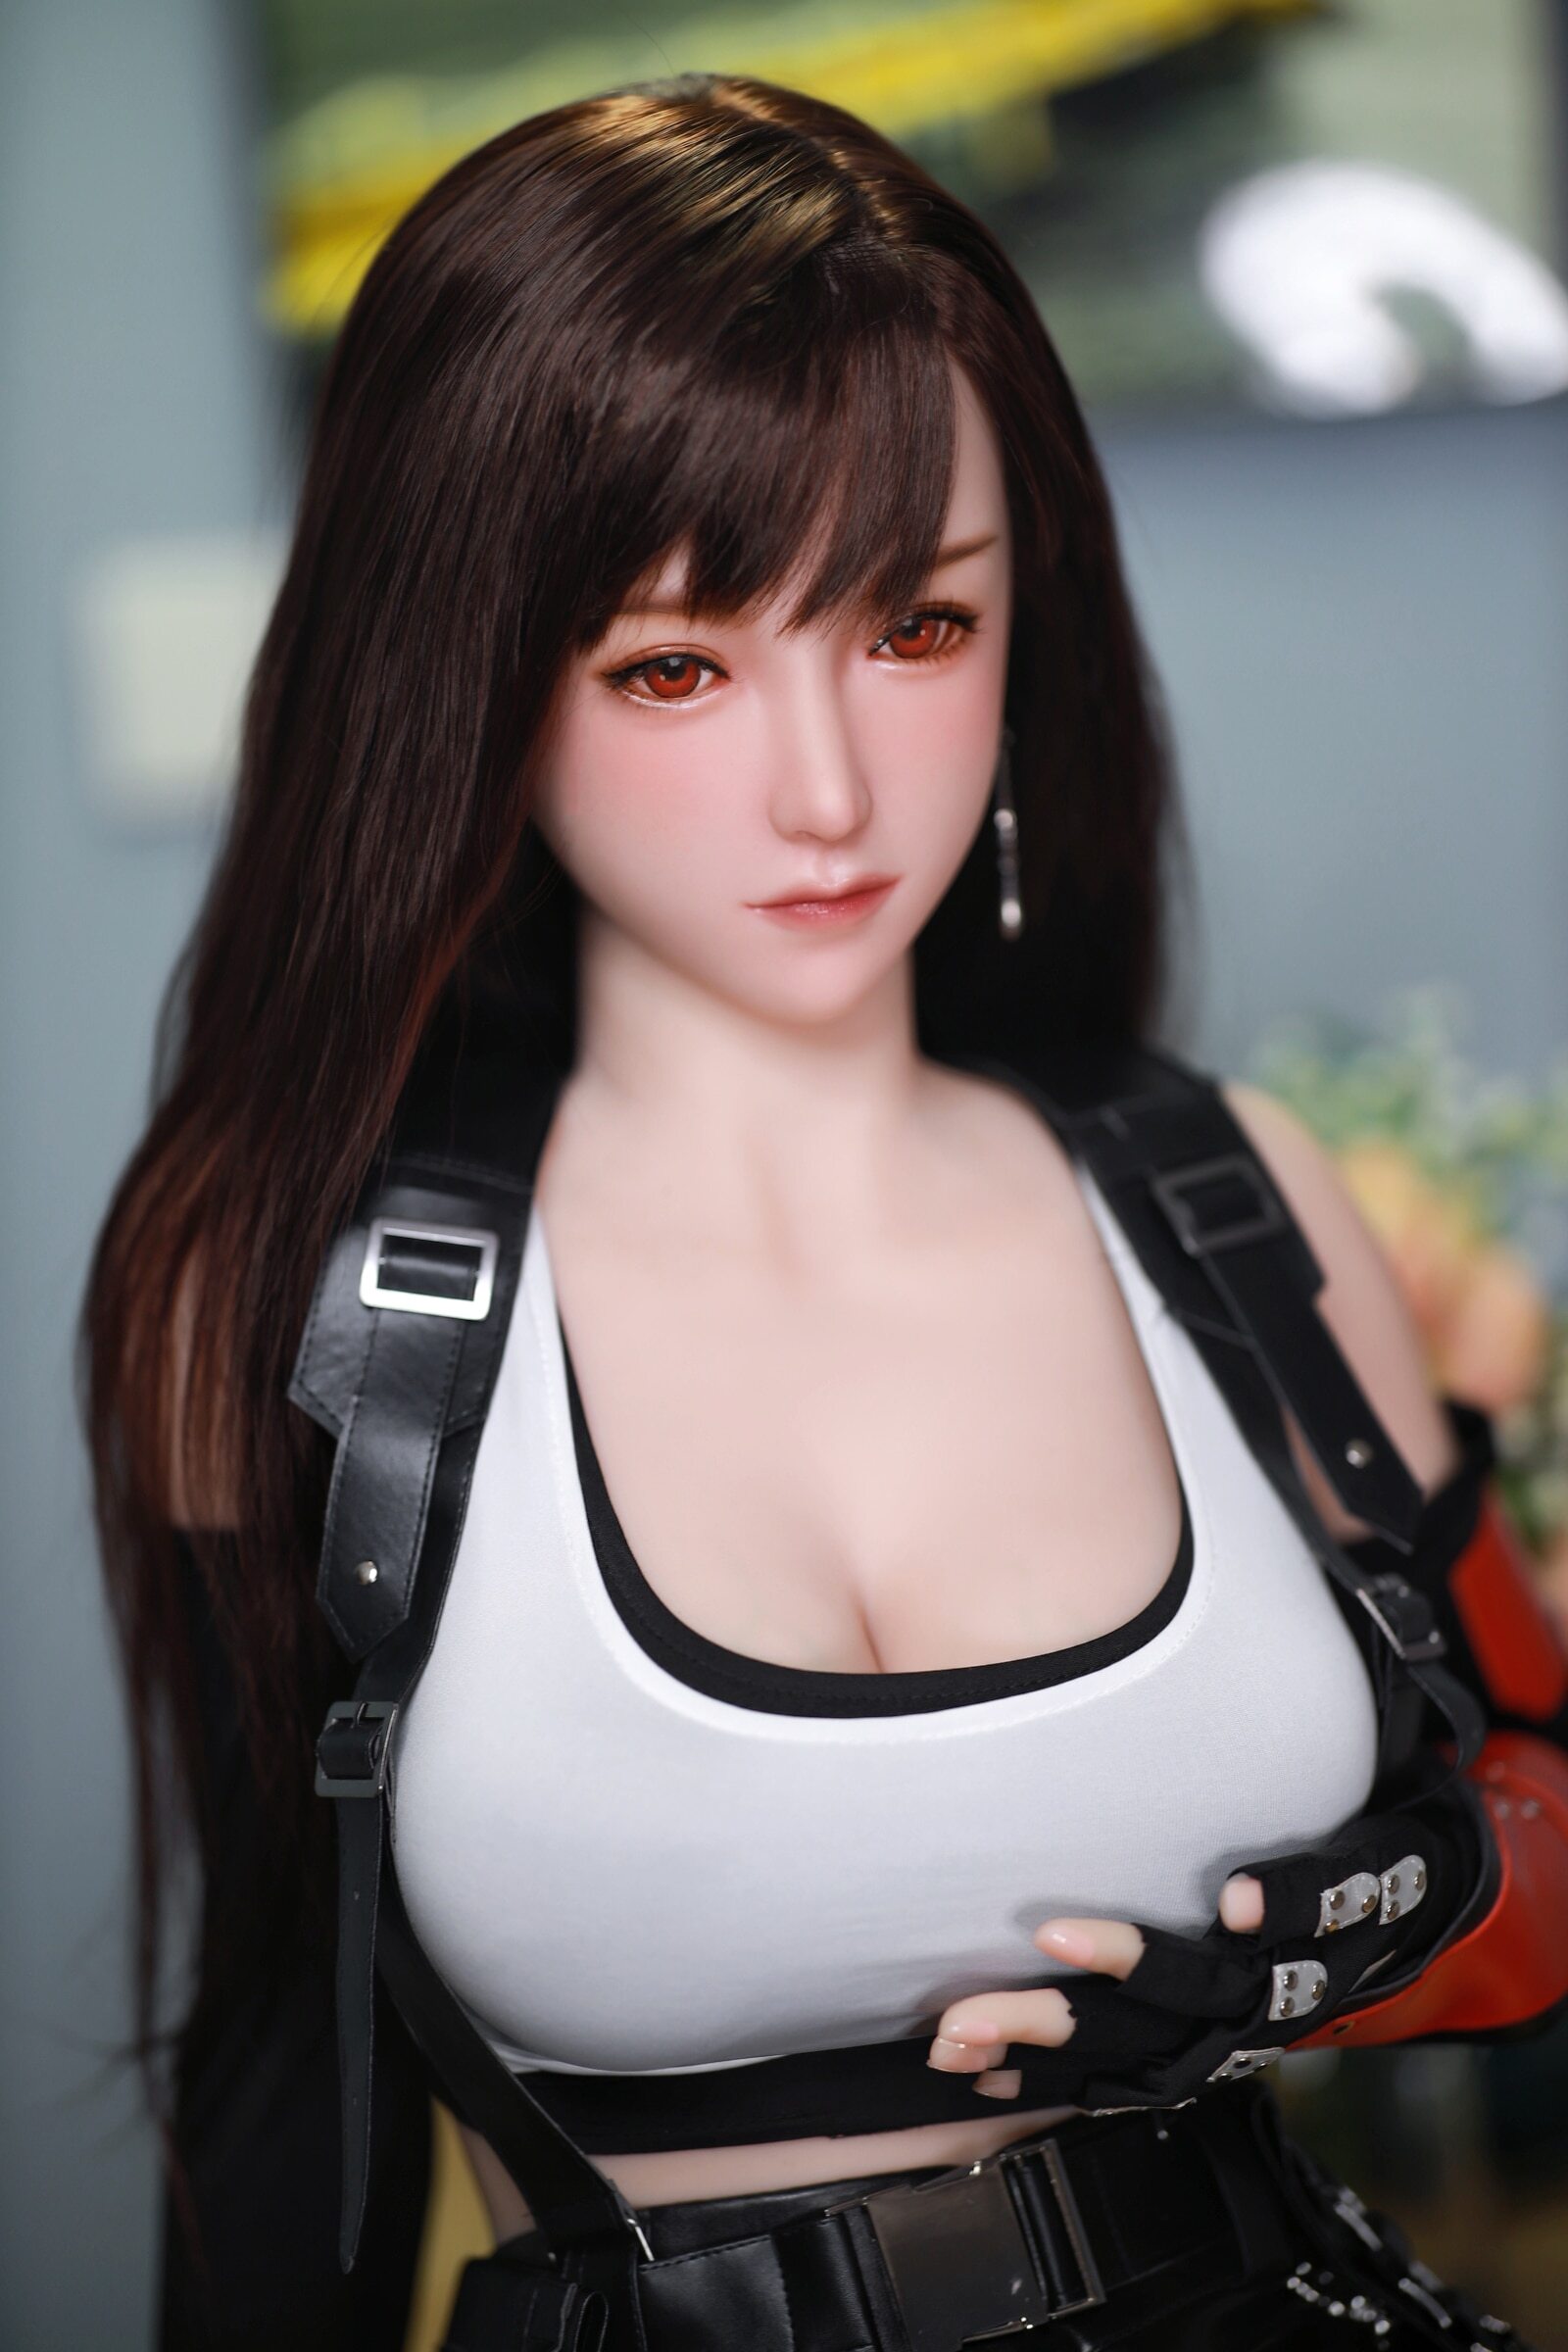 Red Angle Realistic Full Platinum Silicone Implanted Hair Pussy Vagina Japanese Real Love Dolls for Men Masturbator Love Dolls,Masturbator,Love Dolls,Adult sex dolls,Adult Dolls,Adult Love Dolls